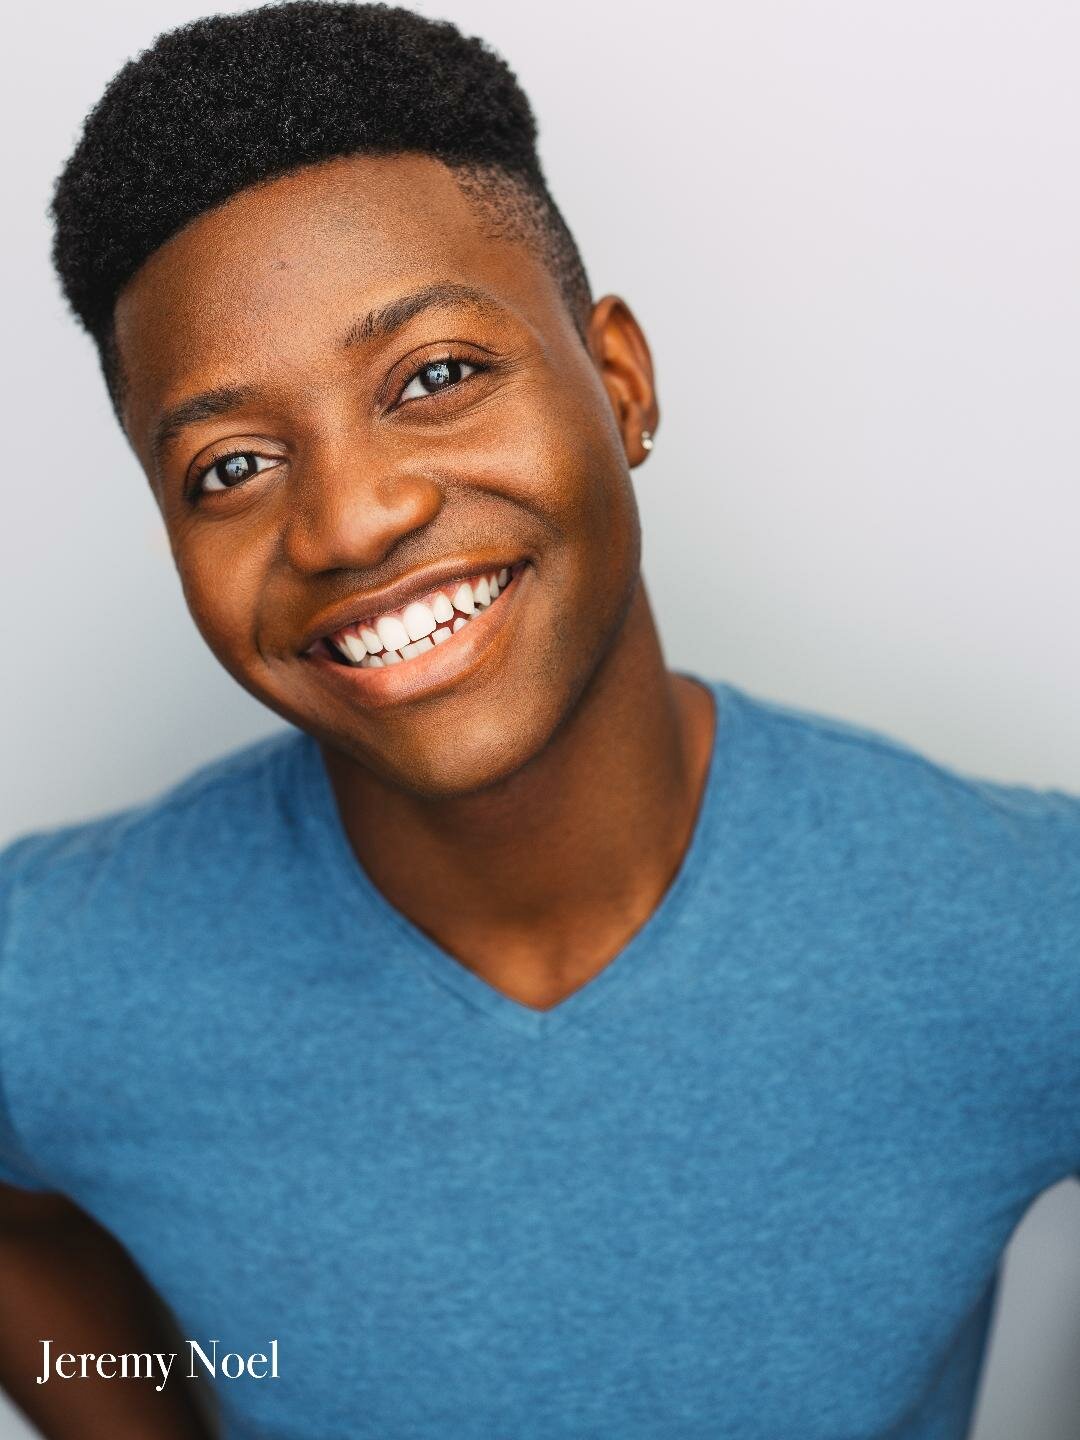 Jeremy Noel, 23, of Sellersville, is serving as Darian Sanders’ understudy for the role of Simba in “The Lion King” which runs from Aug. 16 to Sept. 10 at the Academy of Music.